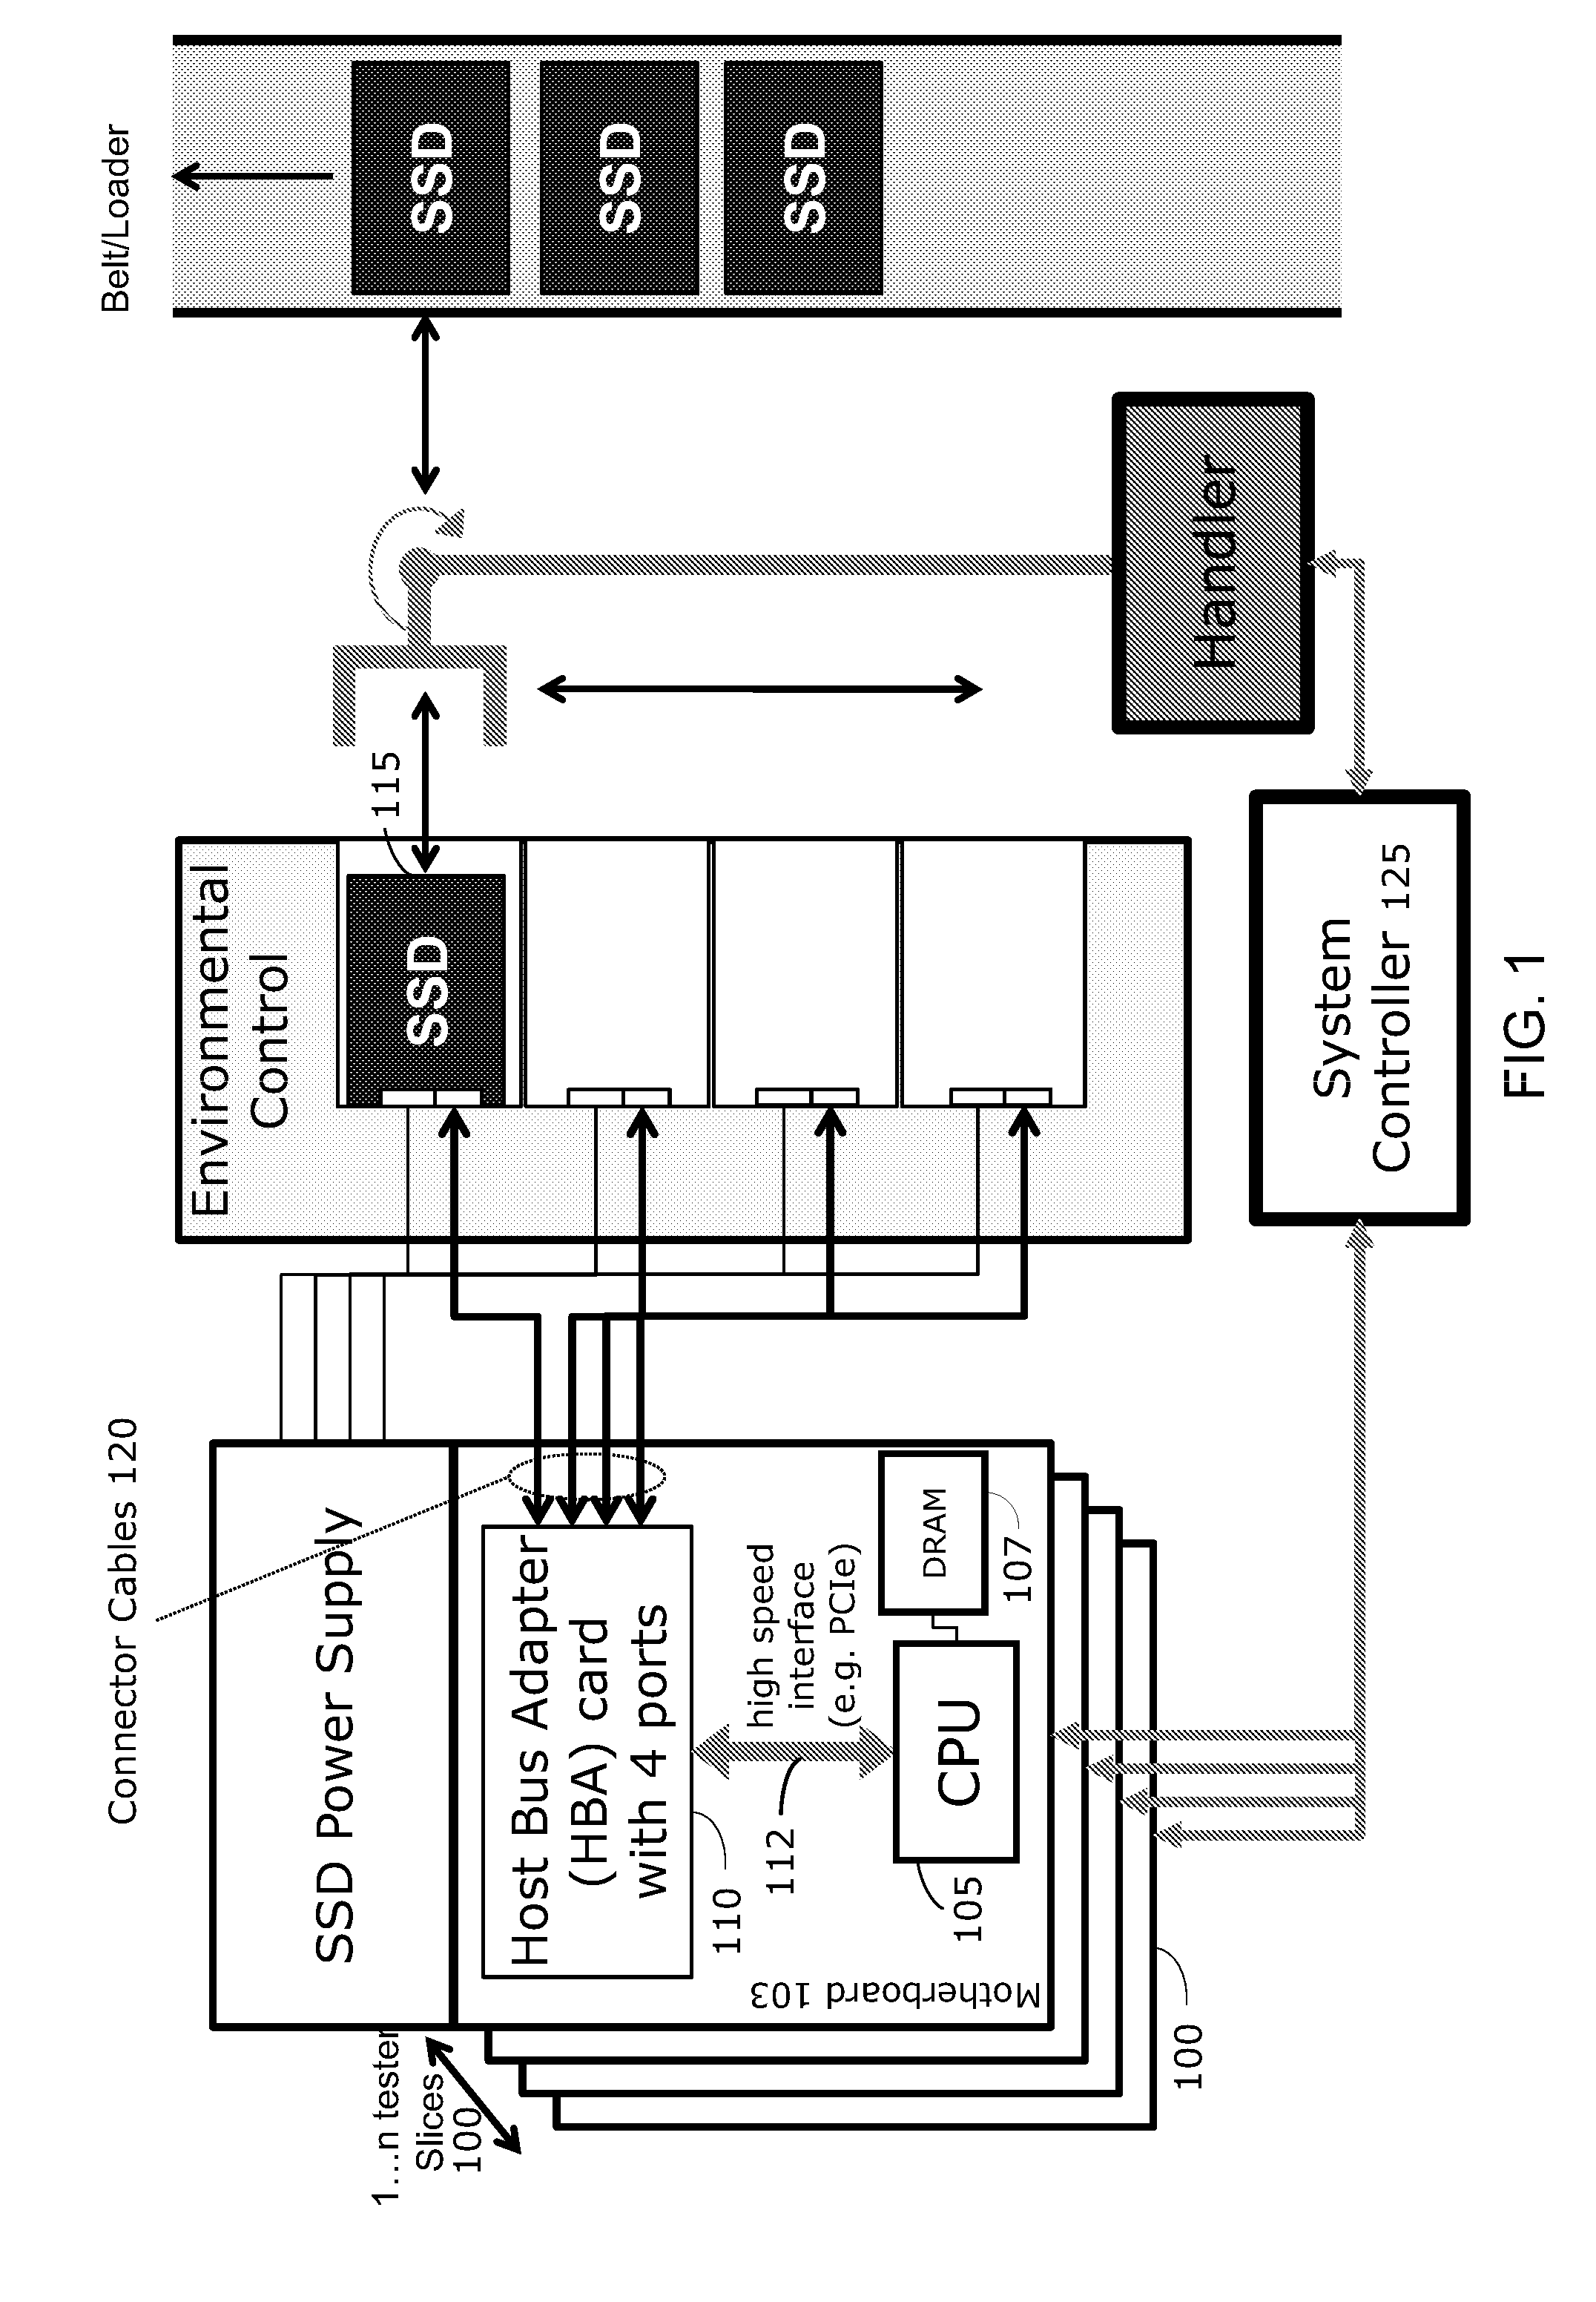 Flexible storage interface tester with variable parallelism and firmware upgradeability